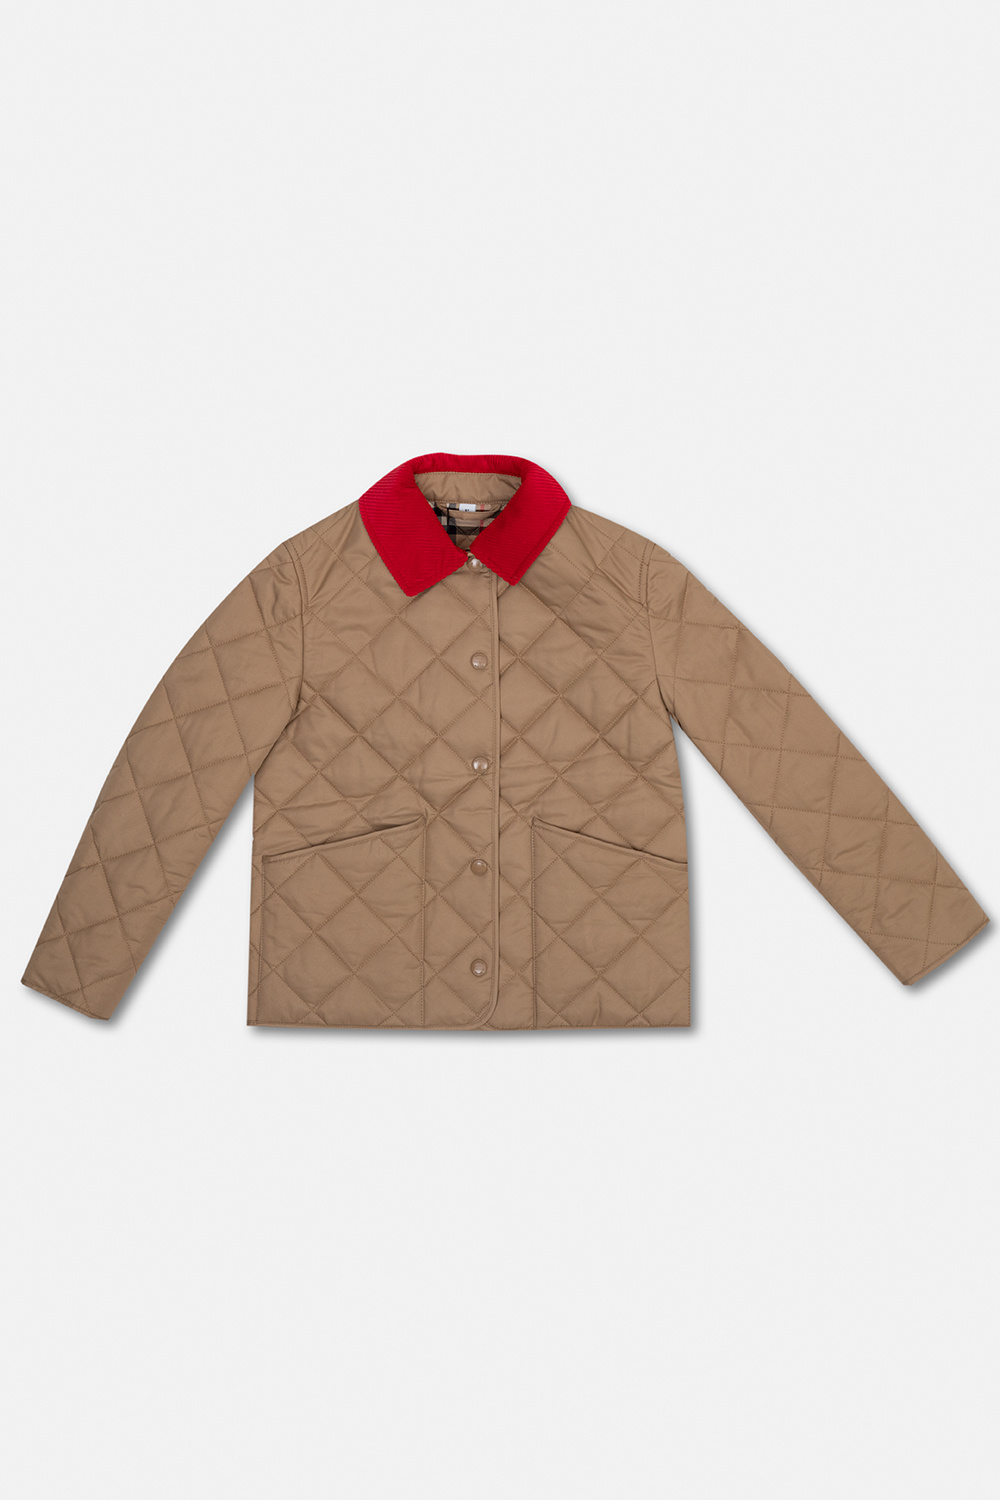 Burberry Kids ‘Daley’ quilted warm